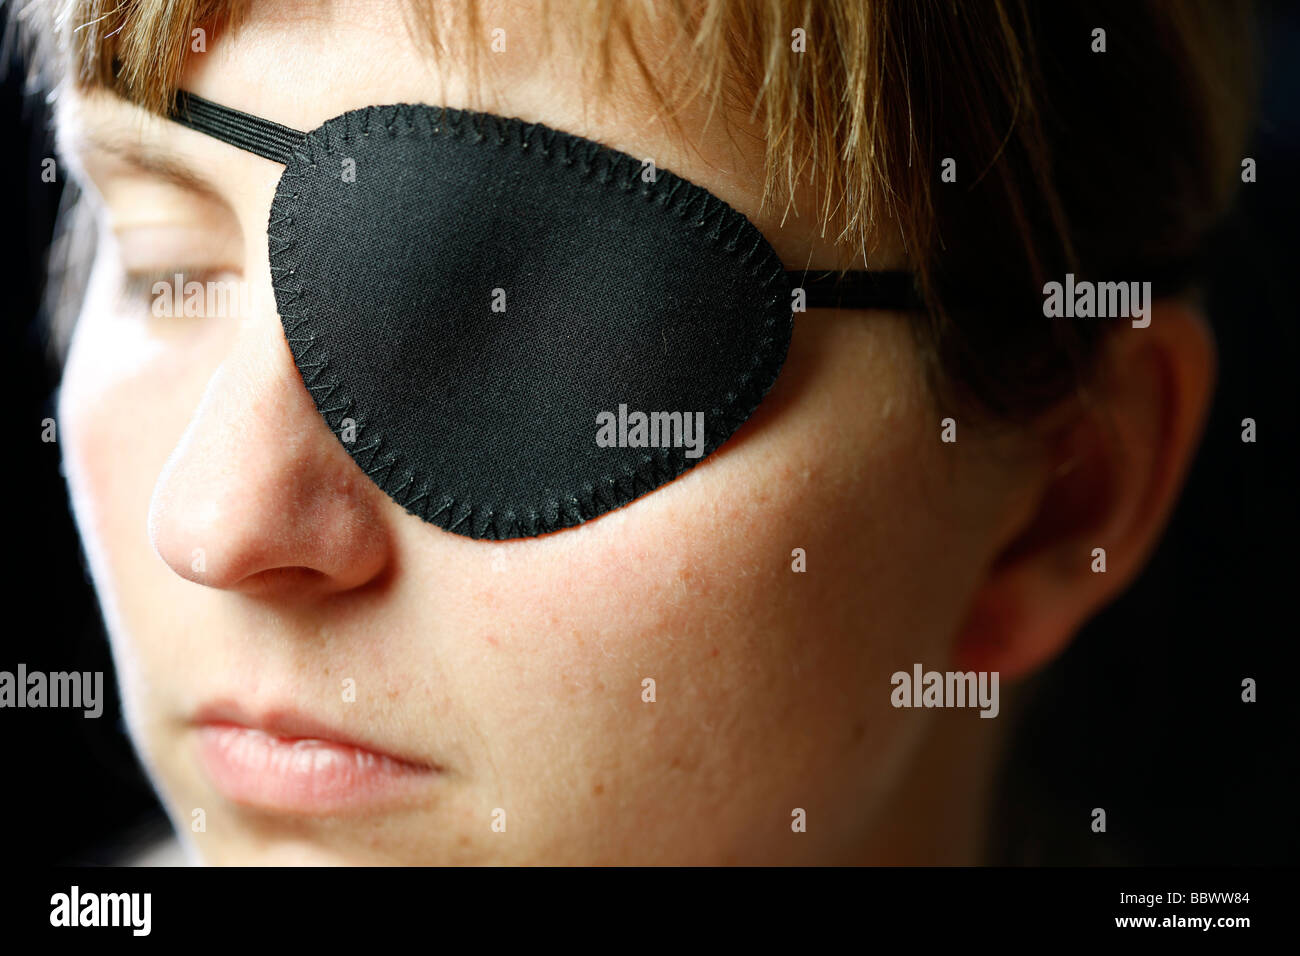 Woman with black eye patch Stock Photo